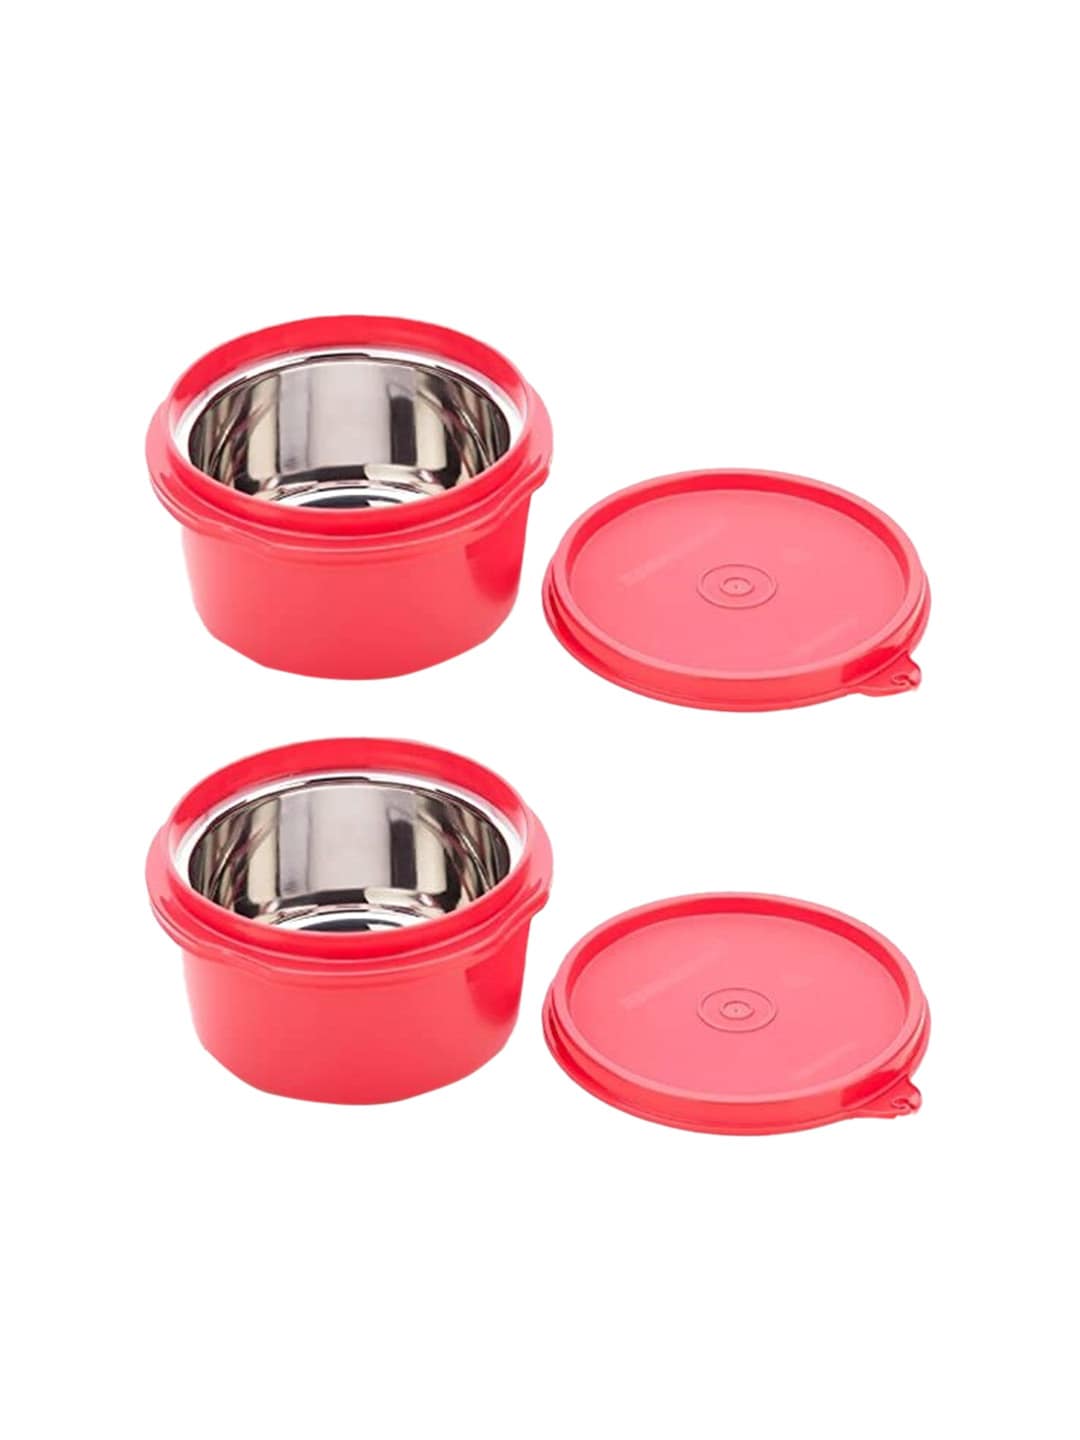 SignoraWare Set Of 2 Red Solid Kitchen Storage Containers Price in India